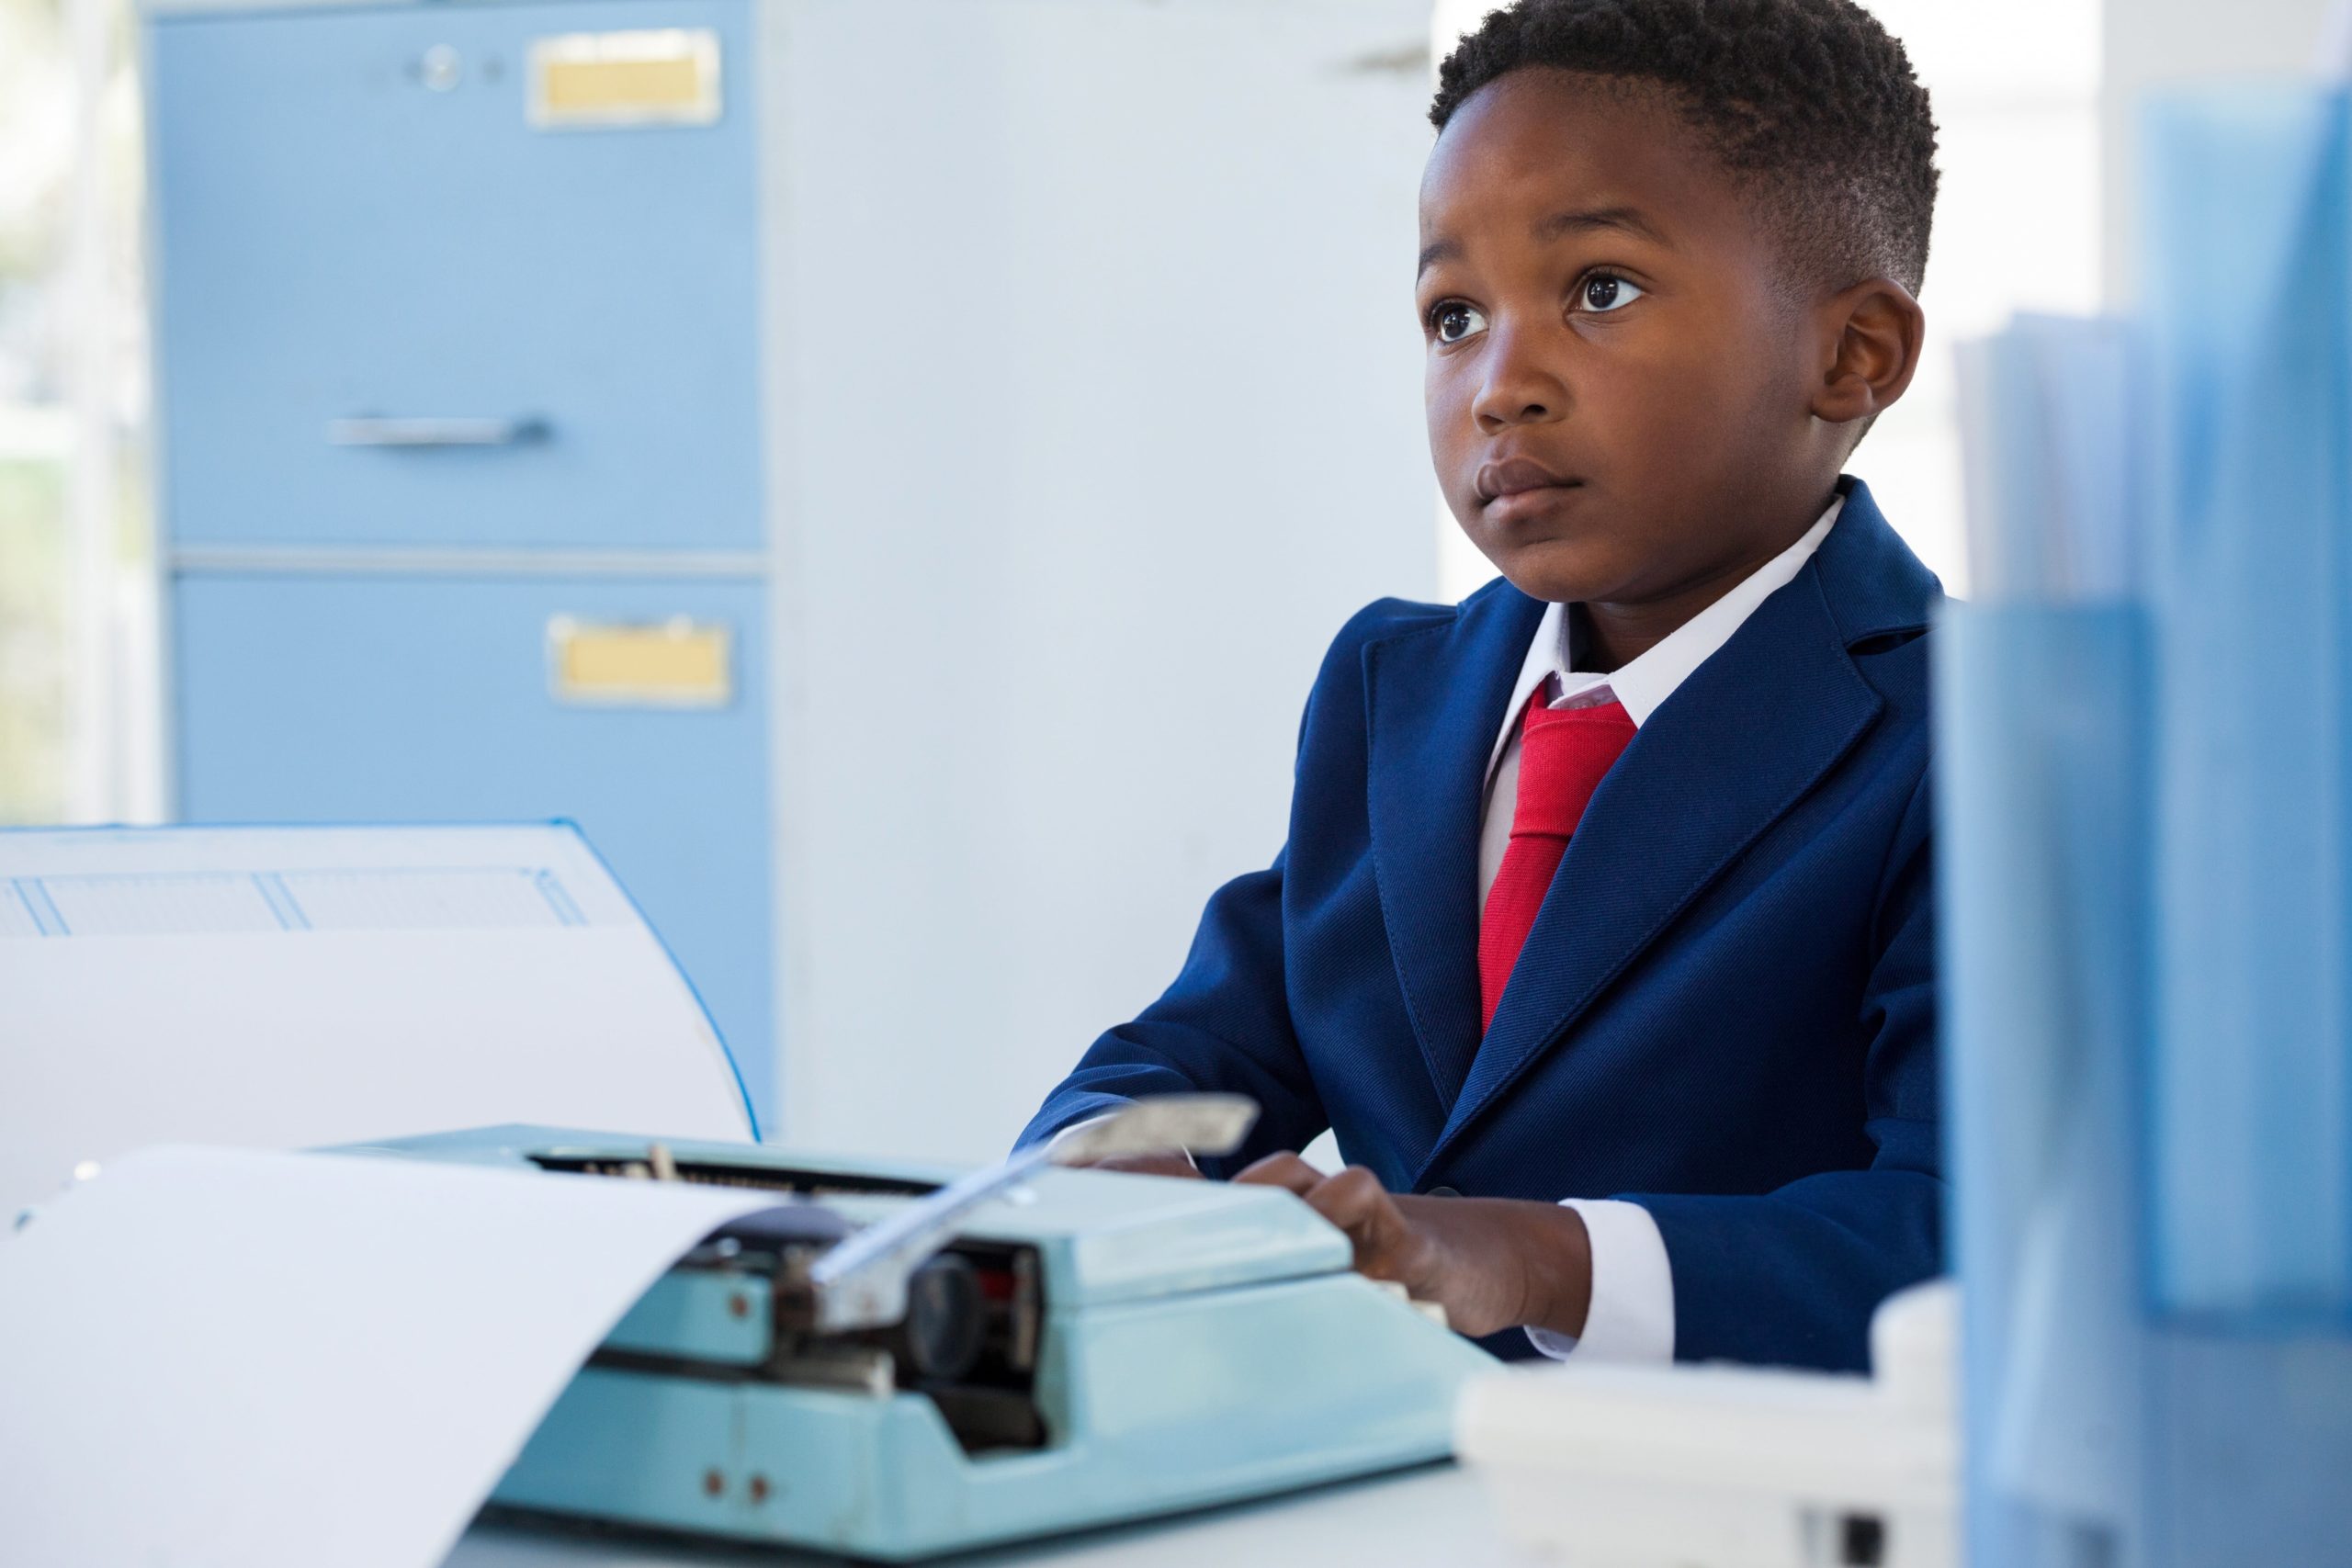 young boy in suit with typewriter